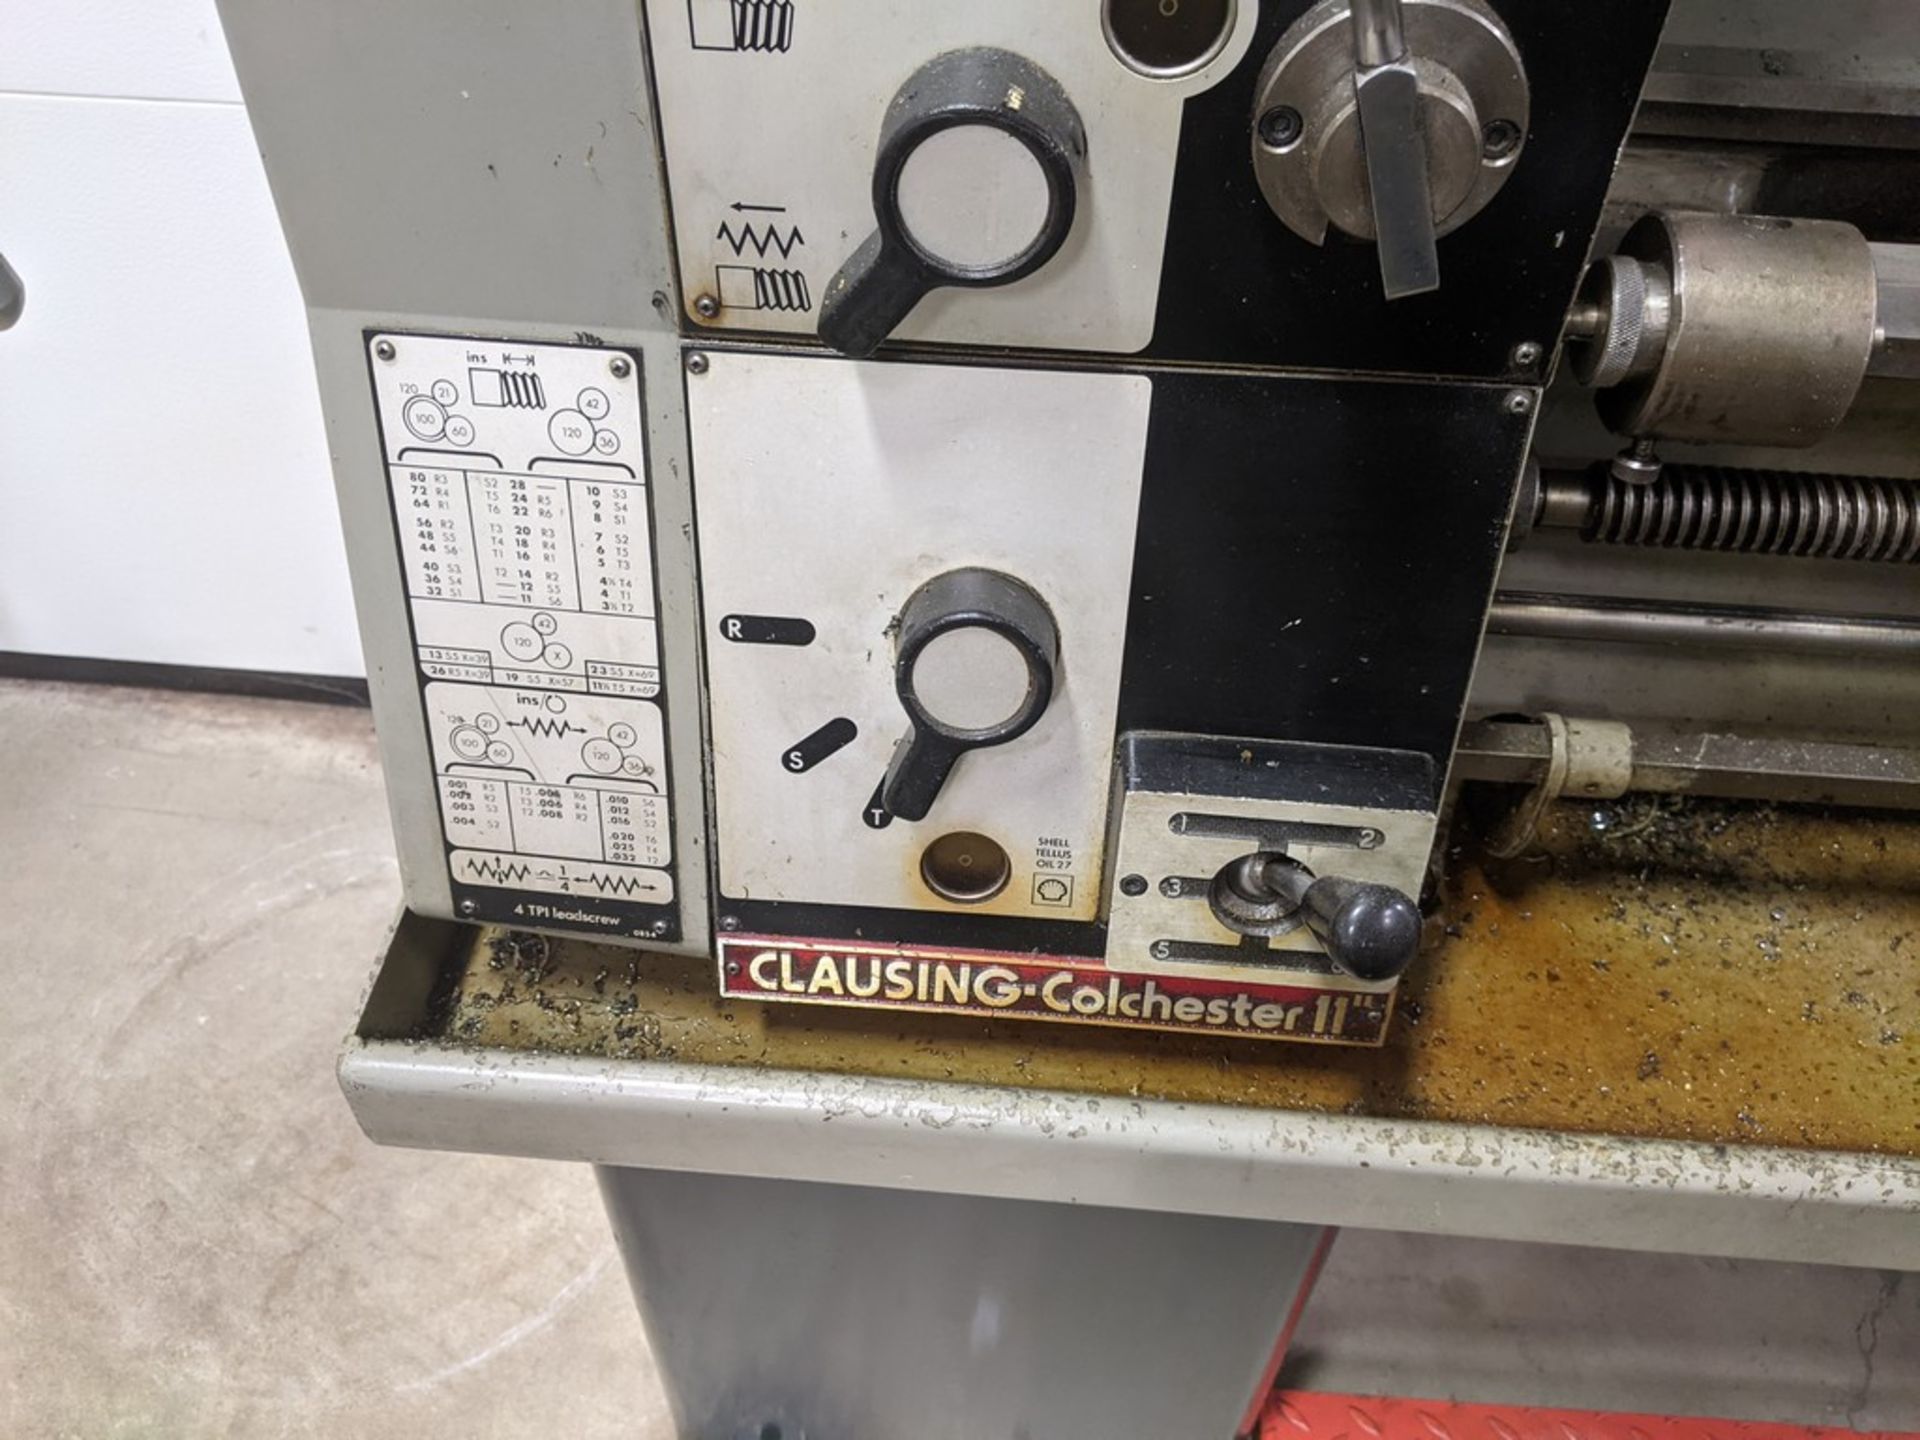 CLAUSING COLCHESTER 11”X40” TOOL ROOM LATHE, S/N 2/0021/01702, 2000 RPM SPINDLE, 6” 6 JAW CHUCK, - Image 3 of 8